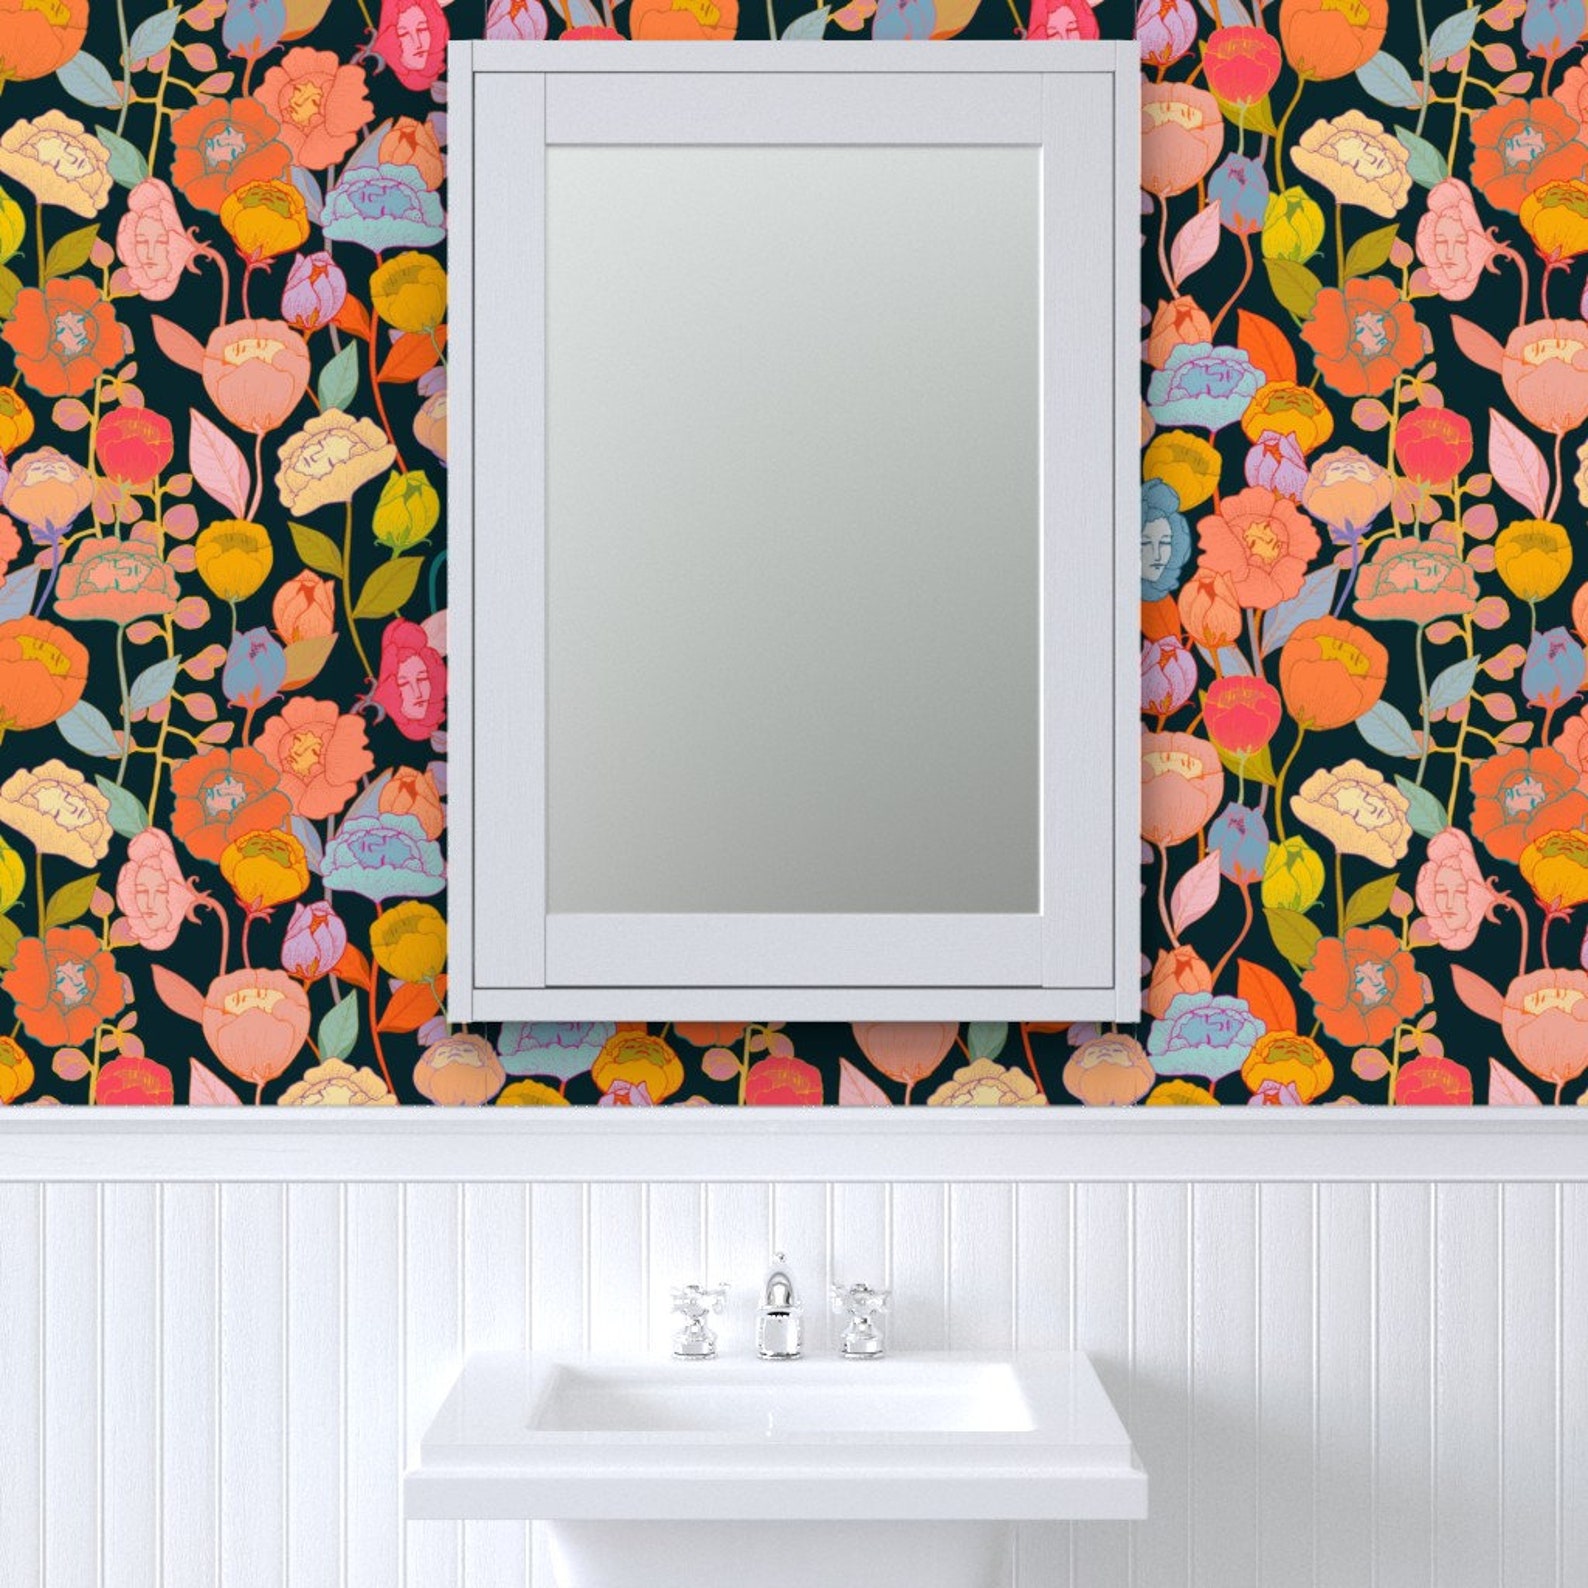 Colorful Floral Wallpaper Wonder Flowers by Ceciliamok - Etsy